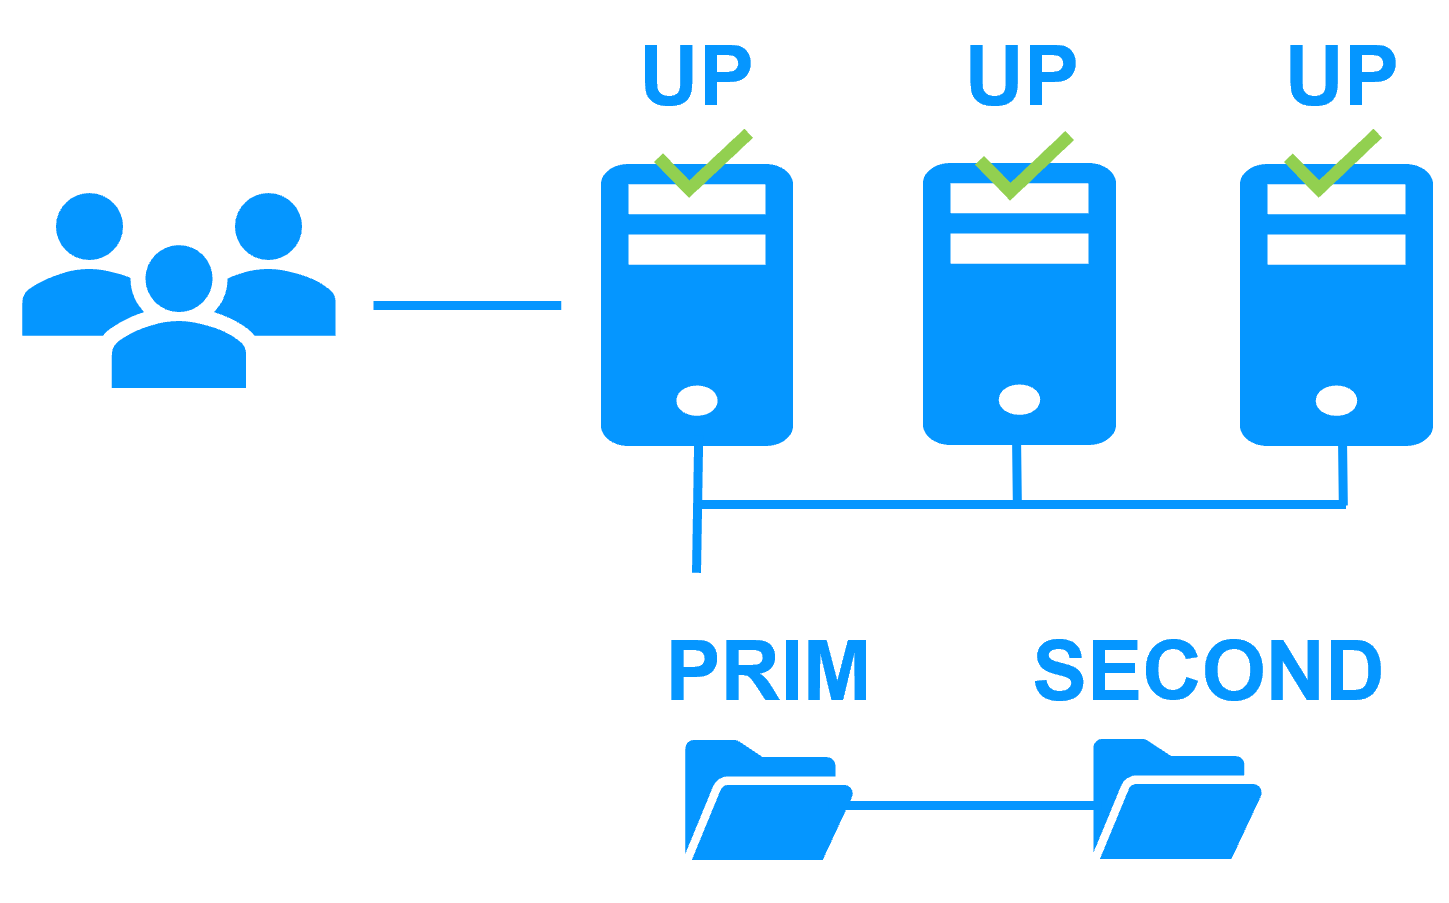 Uniform high availability solution with mirror and farm clusters